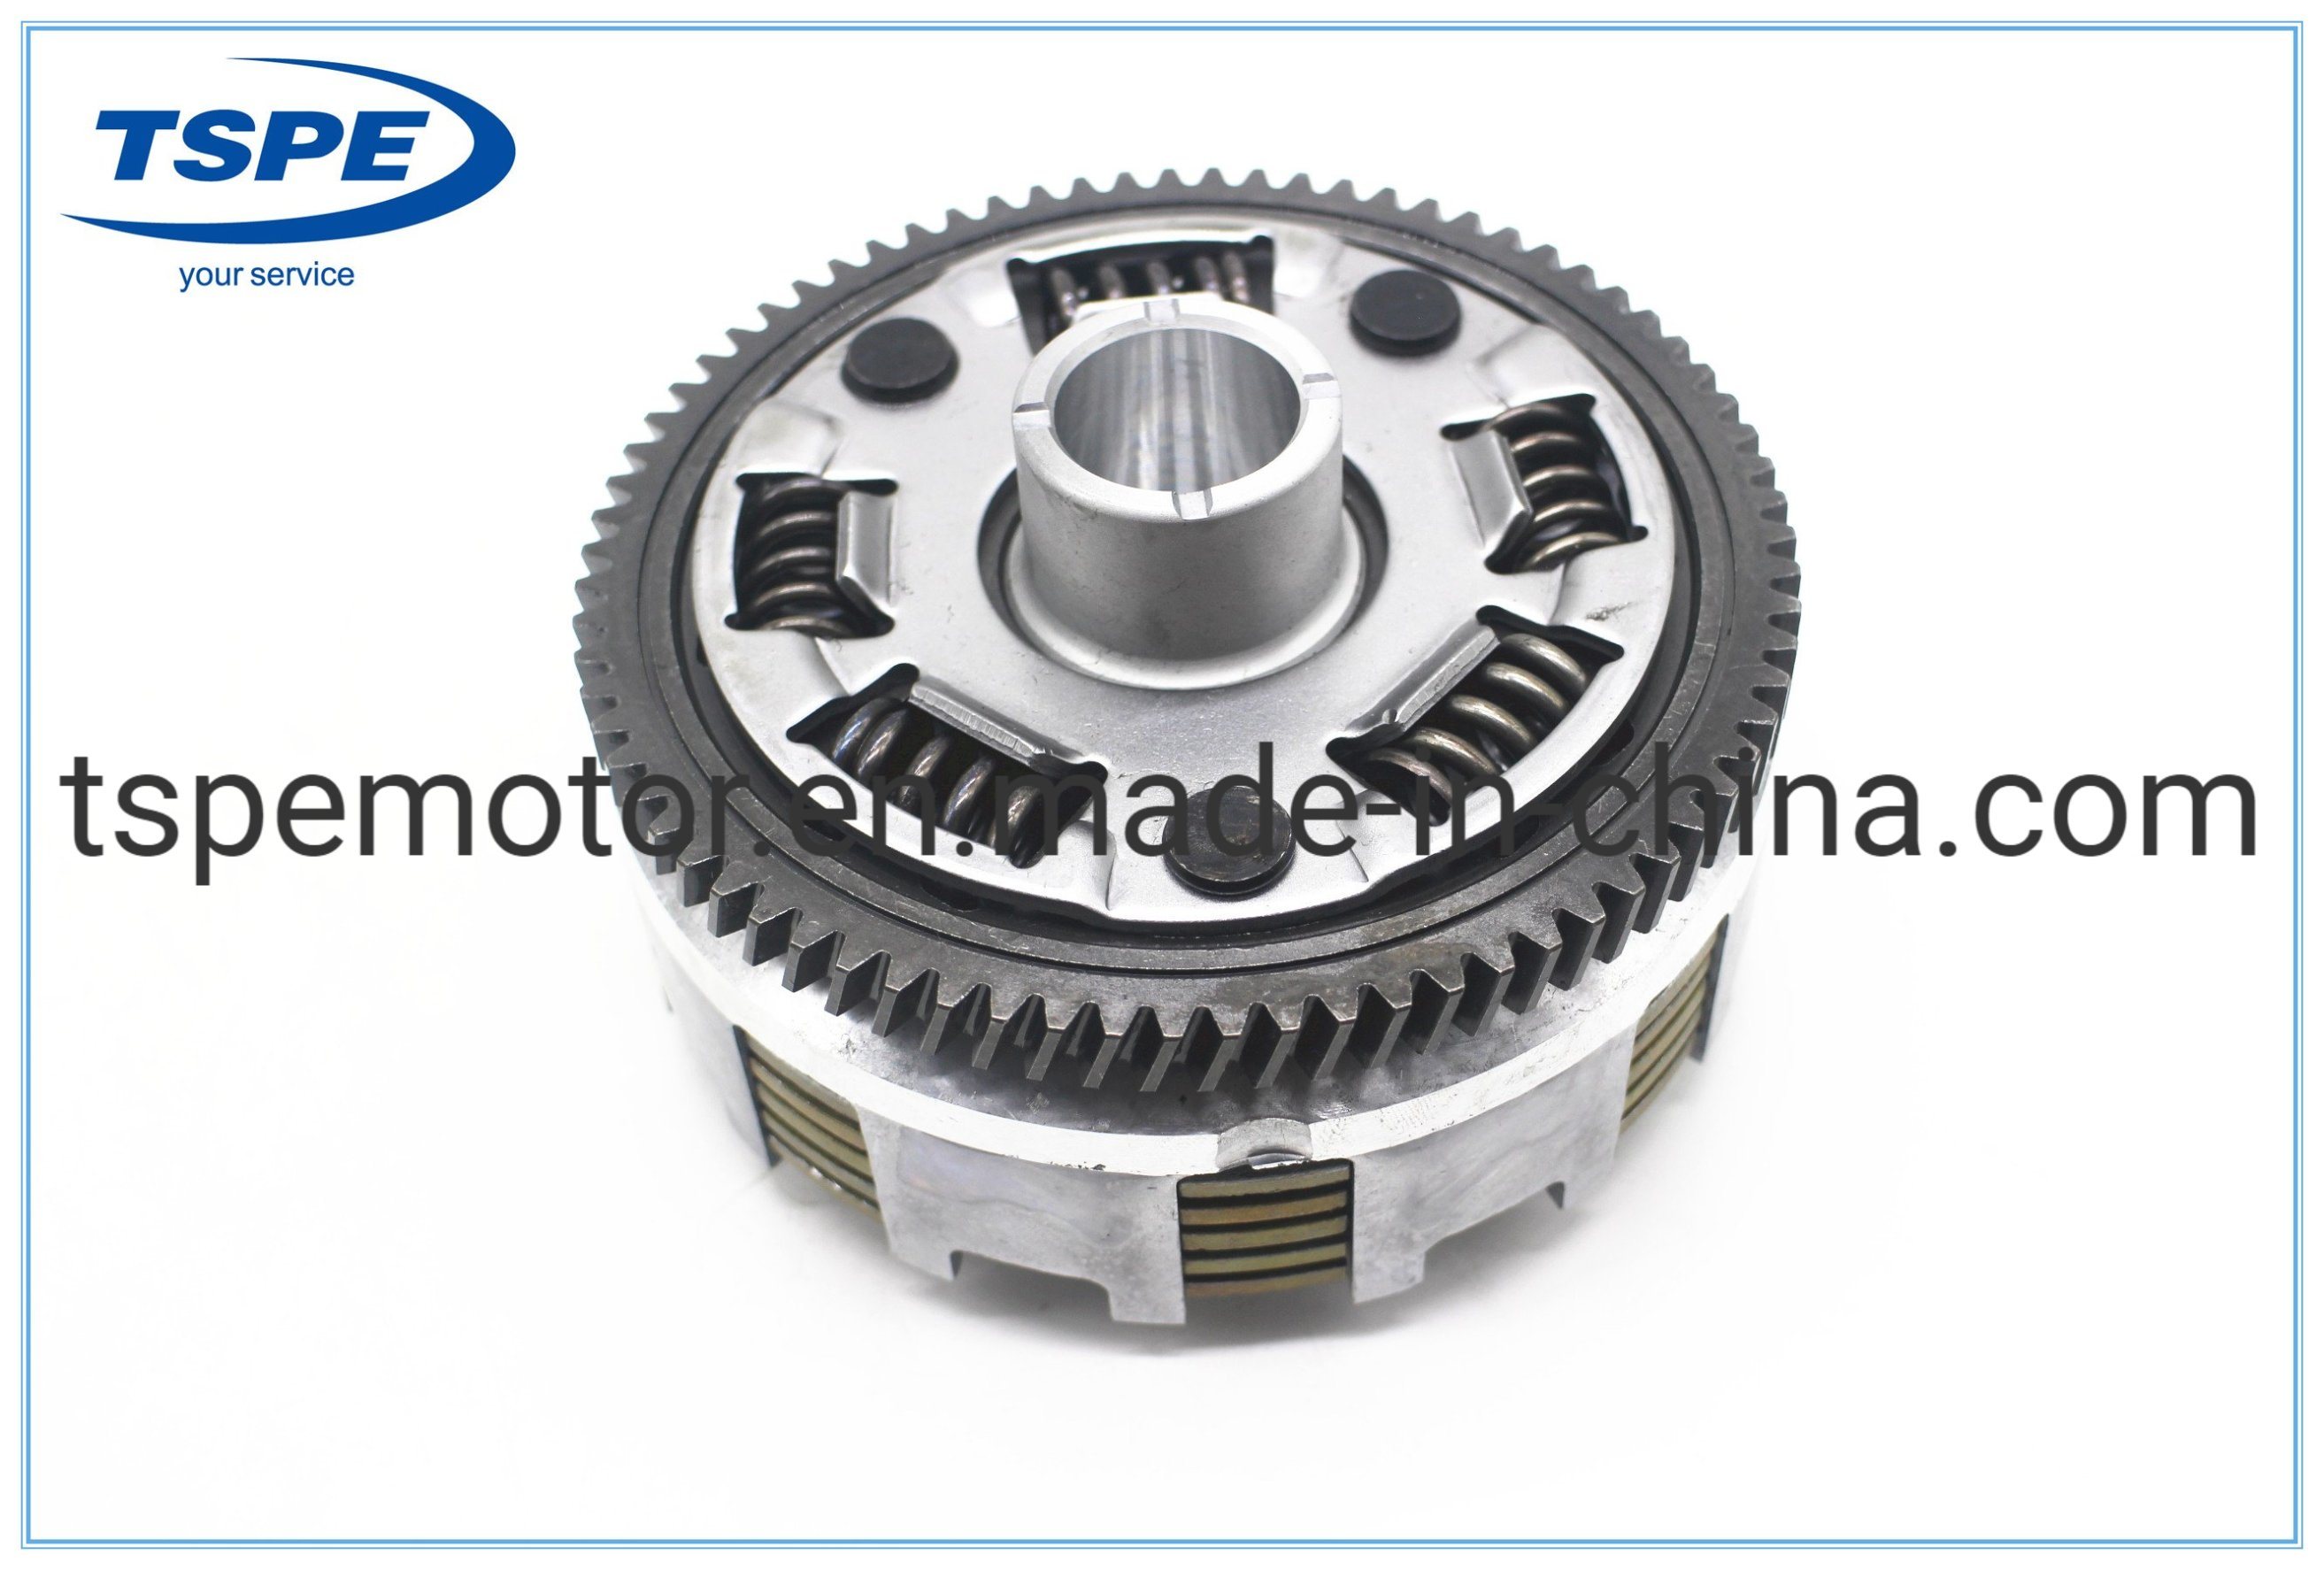 Motorcycle Engine Clutch Assy Clutch Completo for Pulsar Ns200